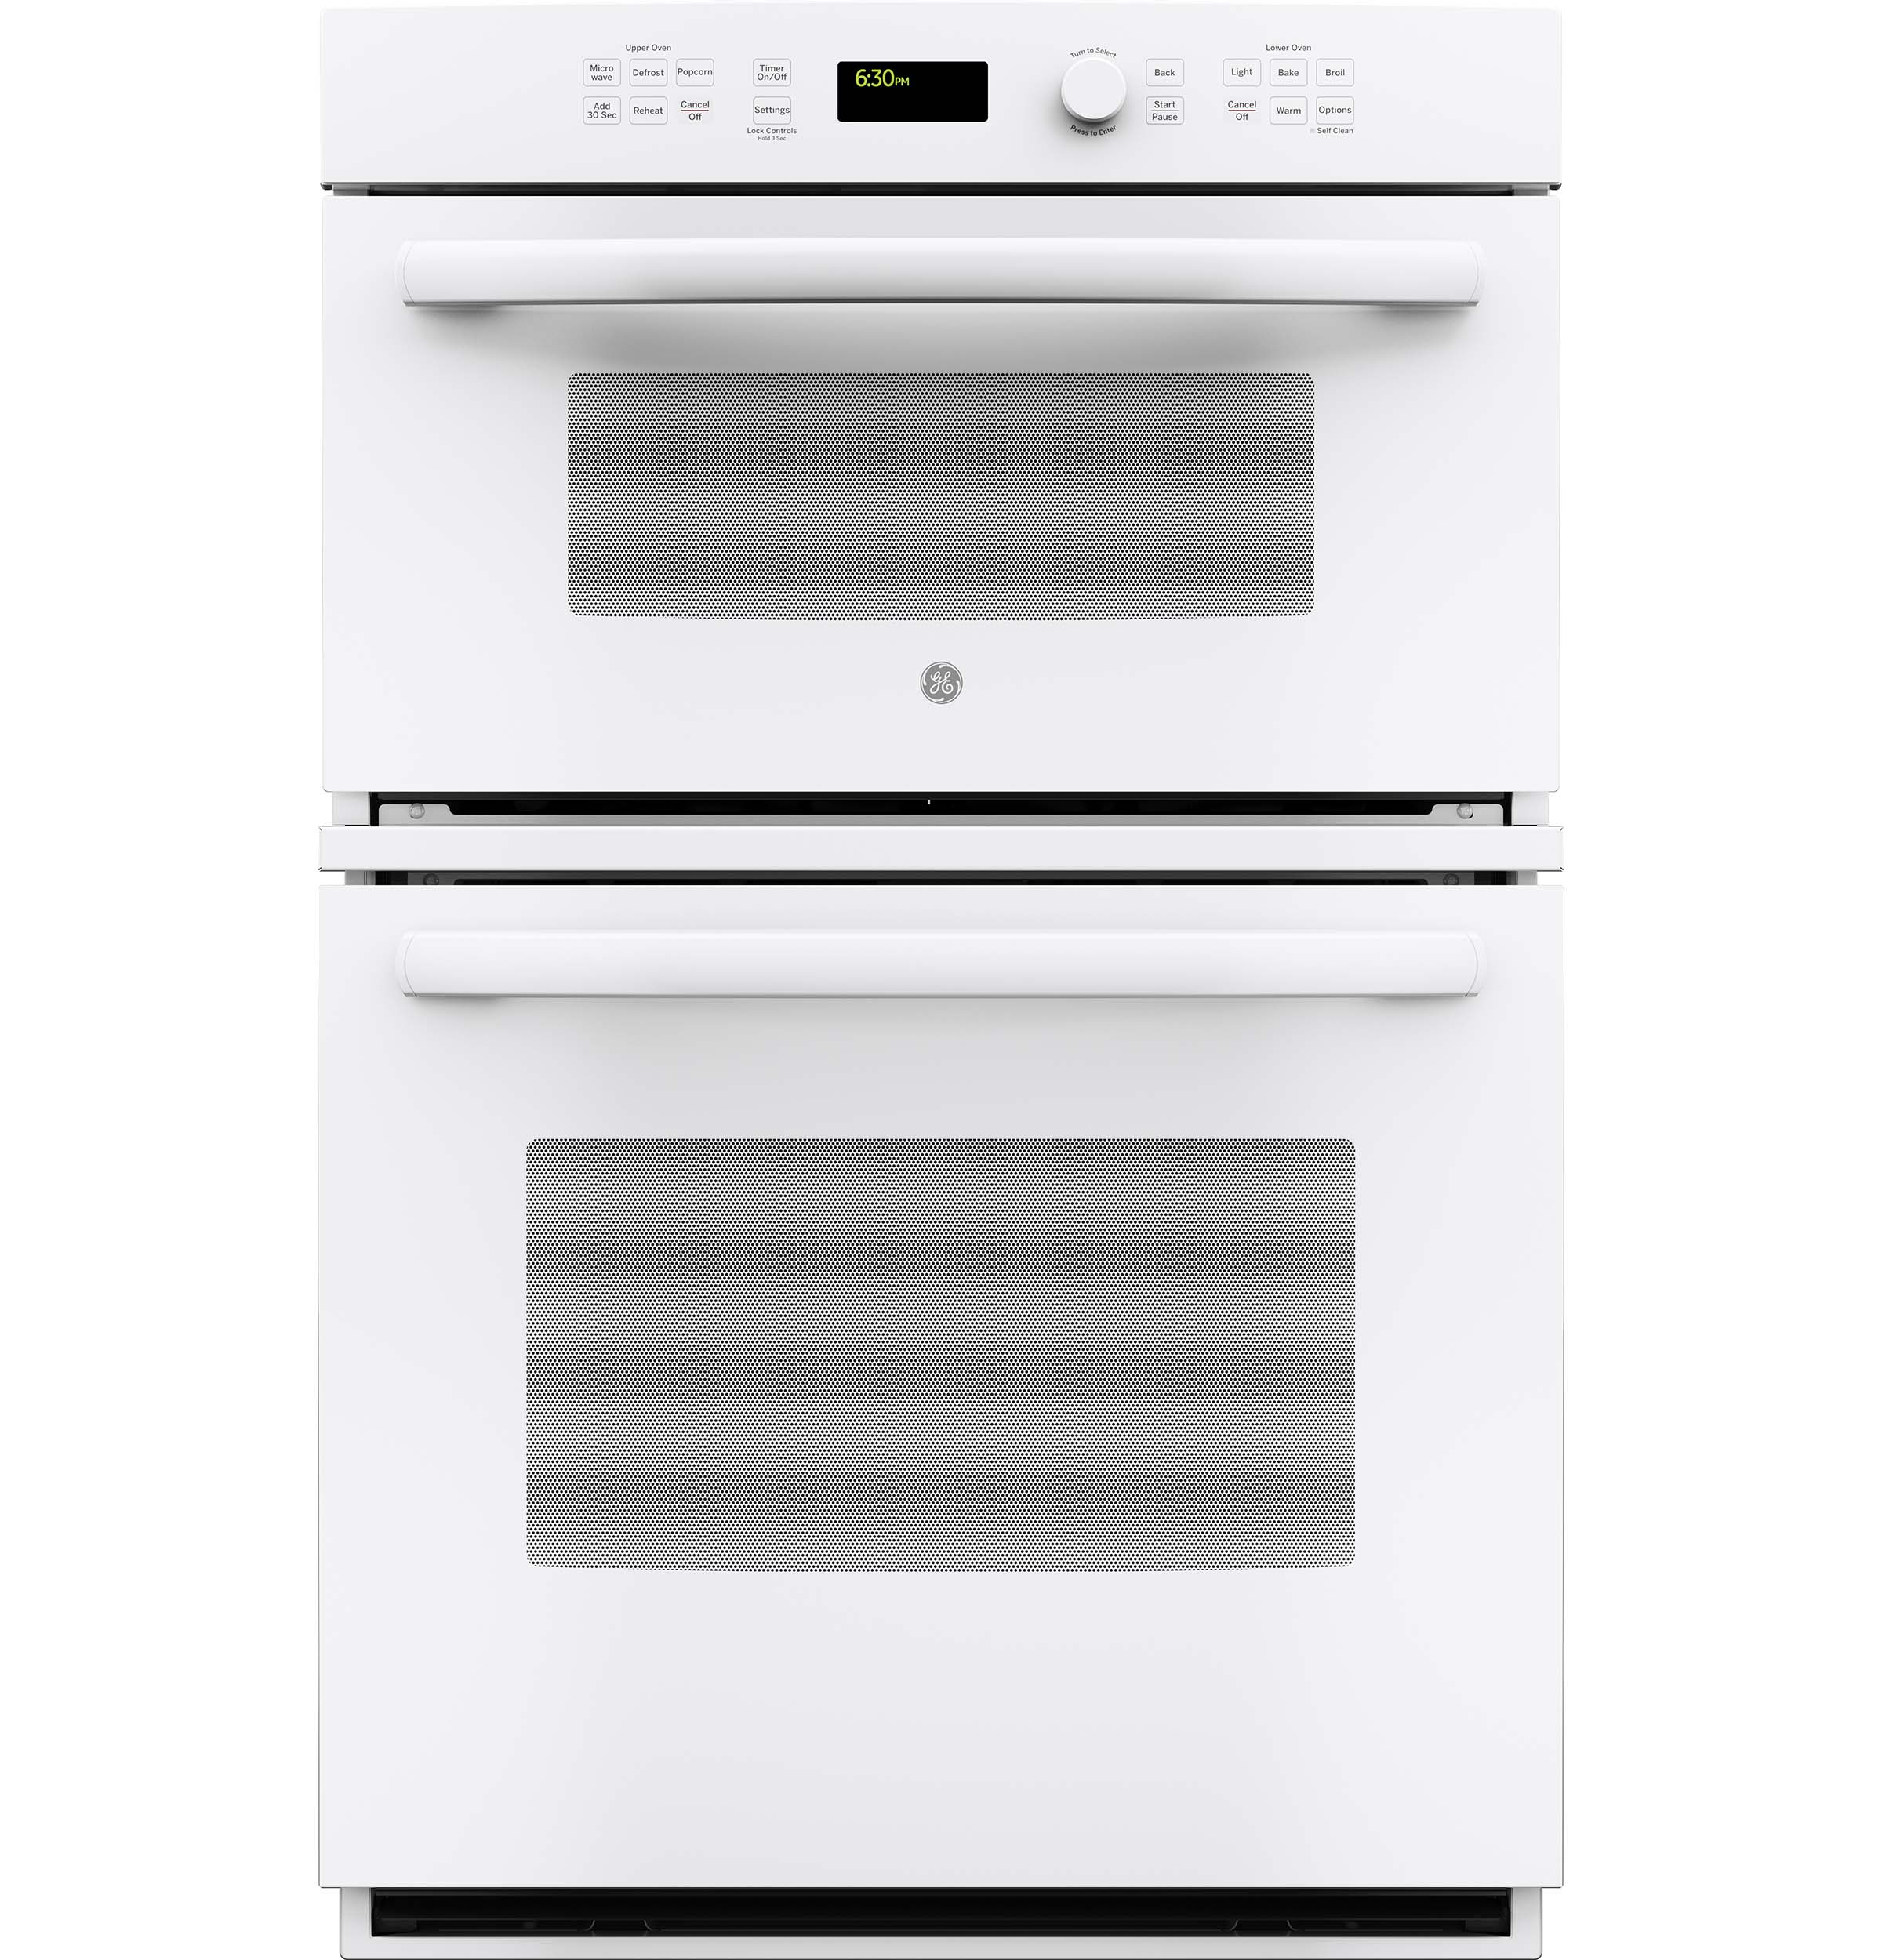 GE Appliances JK3800DHWW 27" Built-In Combination Microwave/Oven - White